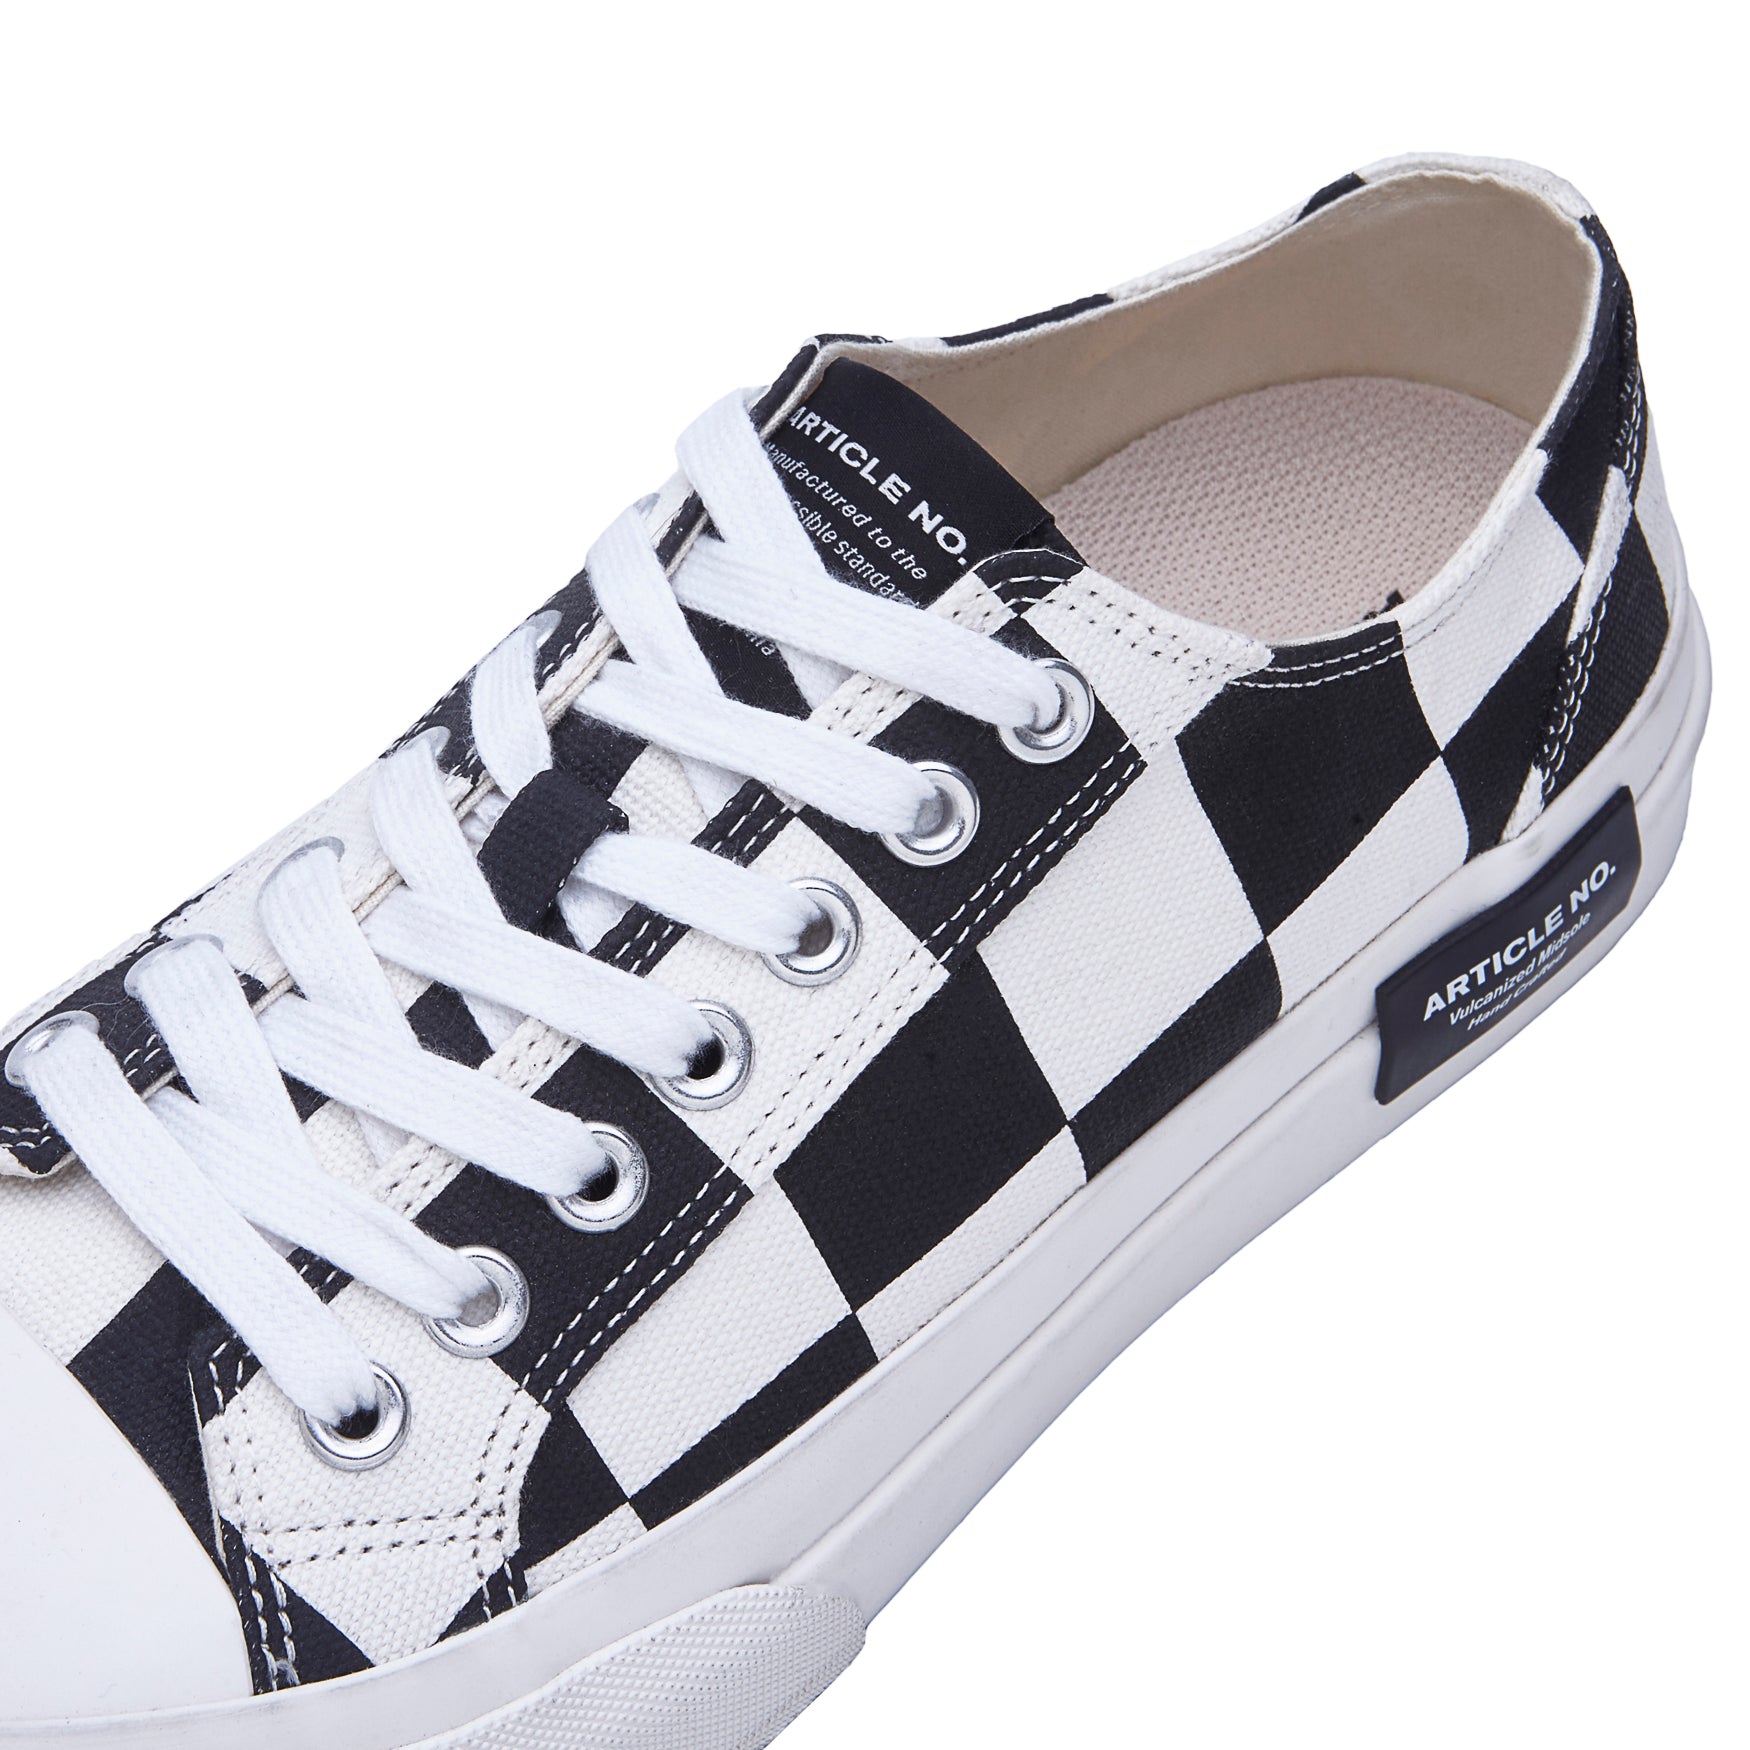 ARTICLE NO. 1007-S4-02 BLACK CHECKED SIDE PATCH LOW-TOP VULCANIZED